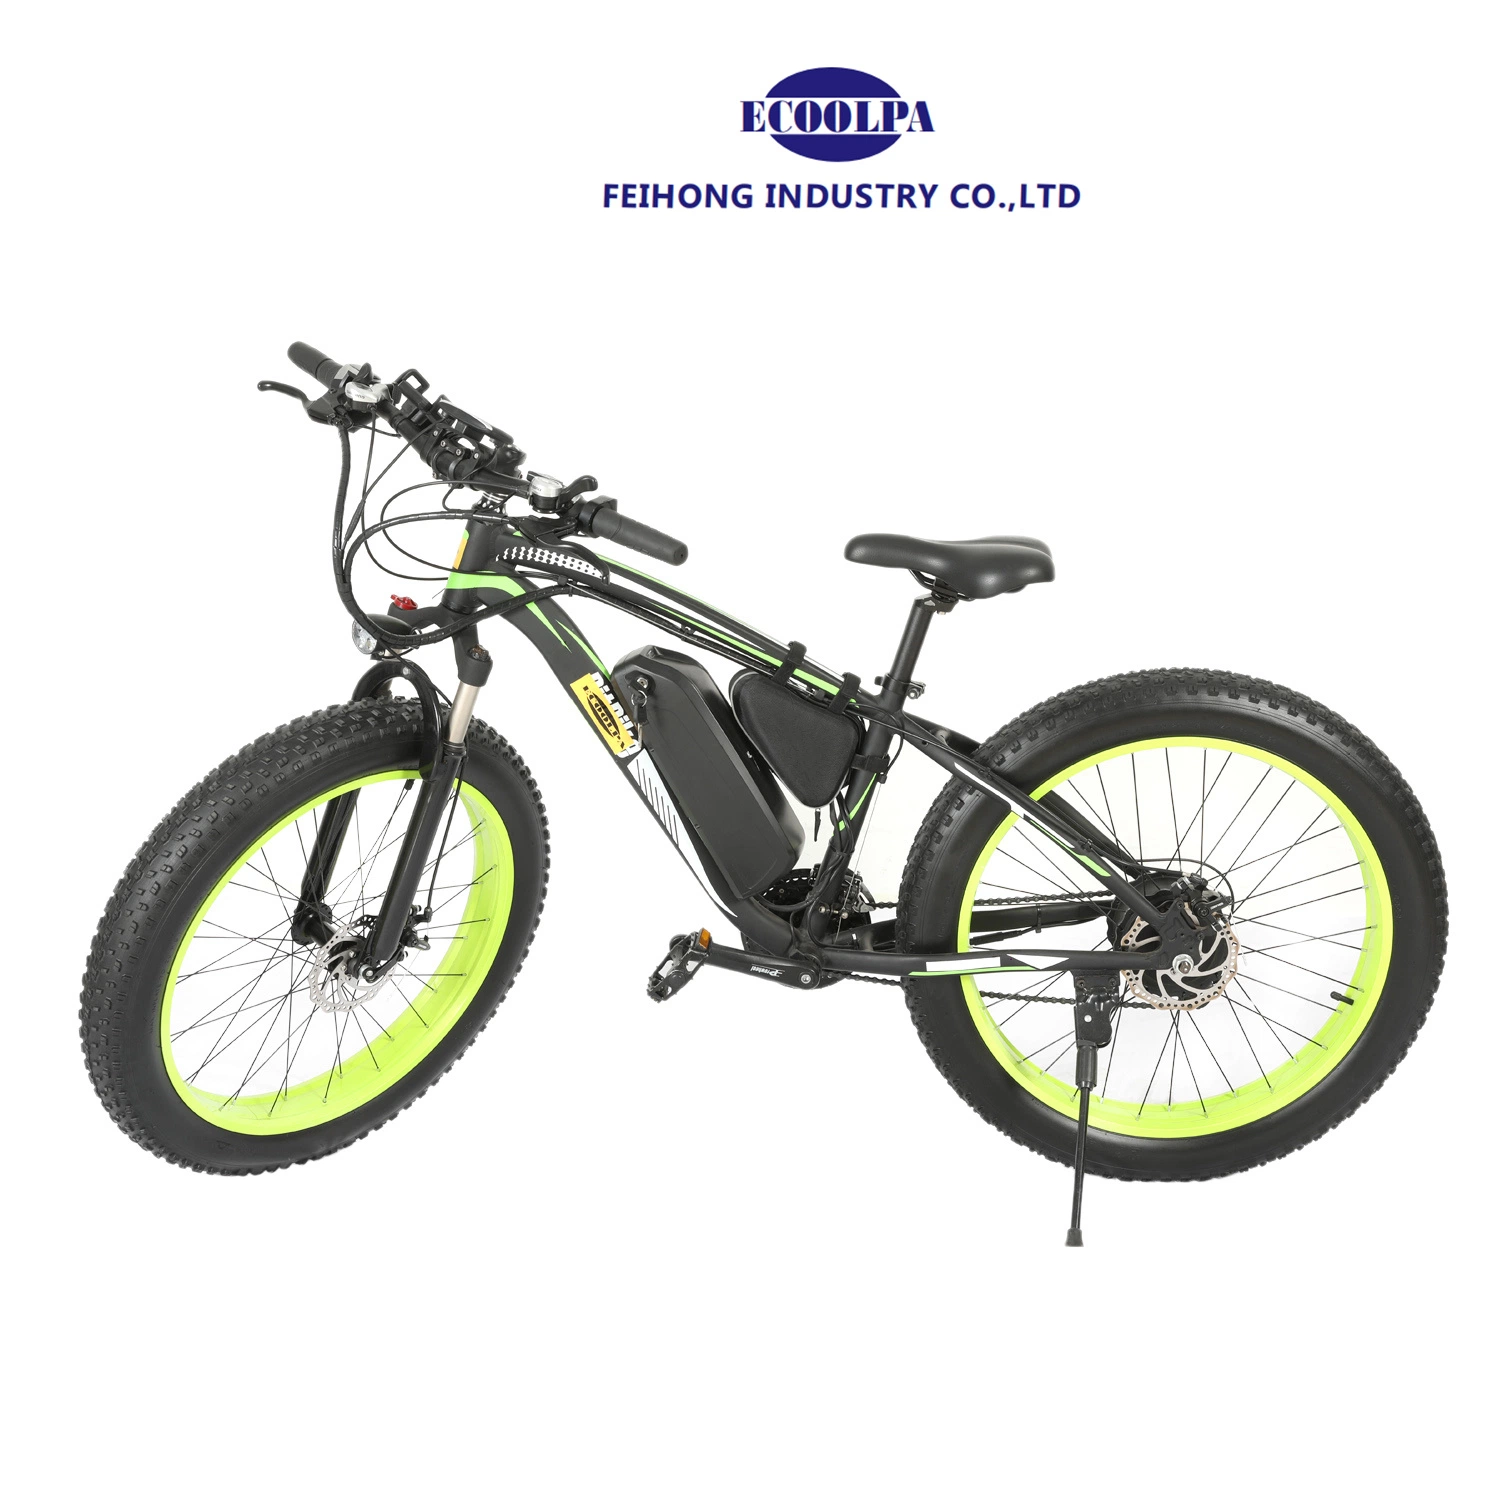 Aluminum Frame 26 Inch Motorcycle Electric Scooter Bicycle Electric Bike Electric Motorcycle Scooter Motor Scooter Electric Fat Bike 48V 10ah Battery 350W Motor